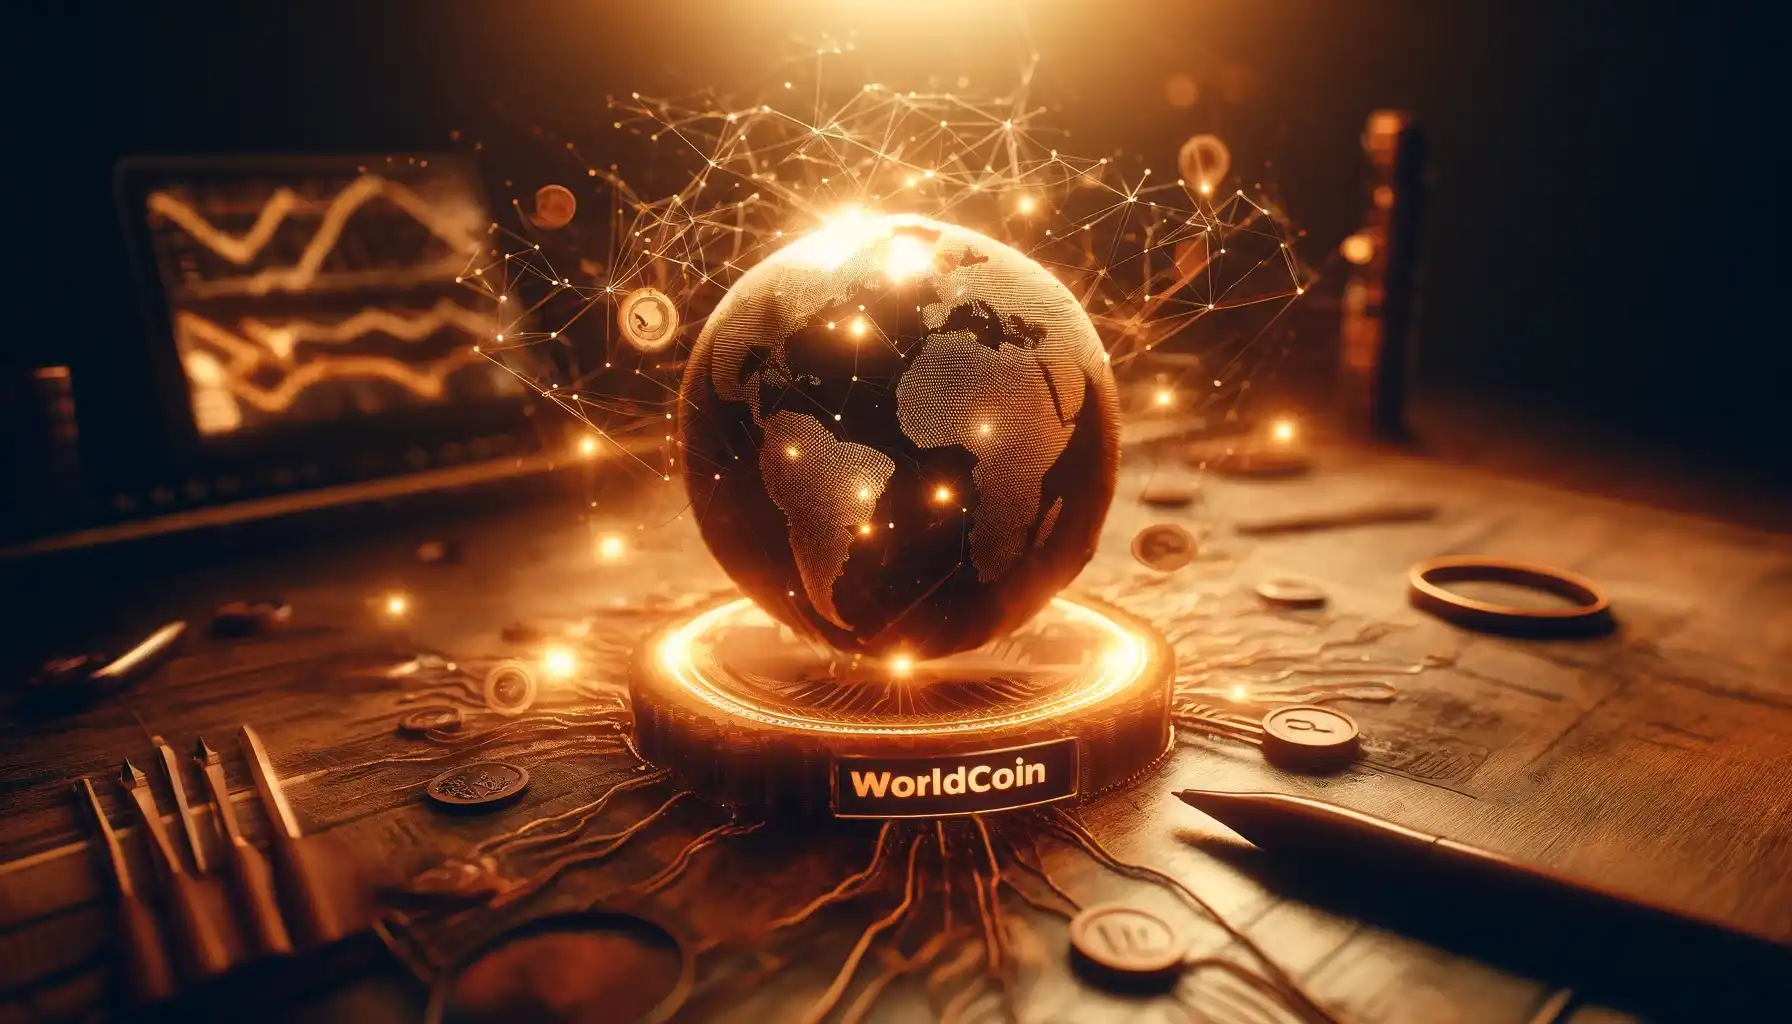 Worldcoin sees strong capital outflow, how much longer can the bulls hold on?